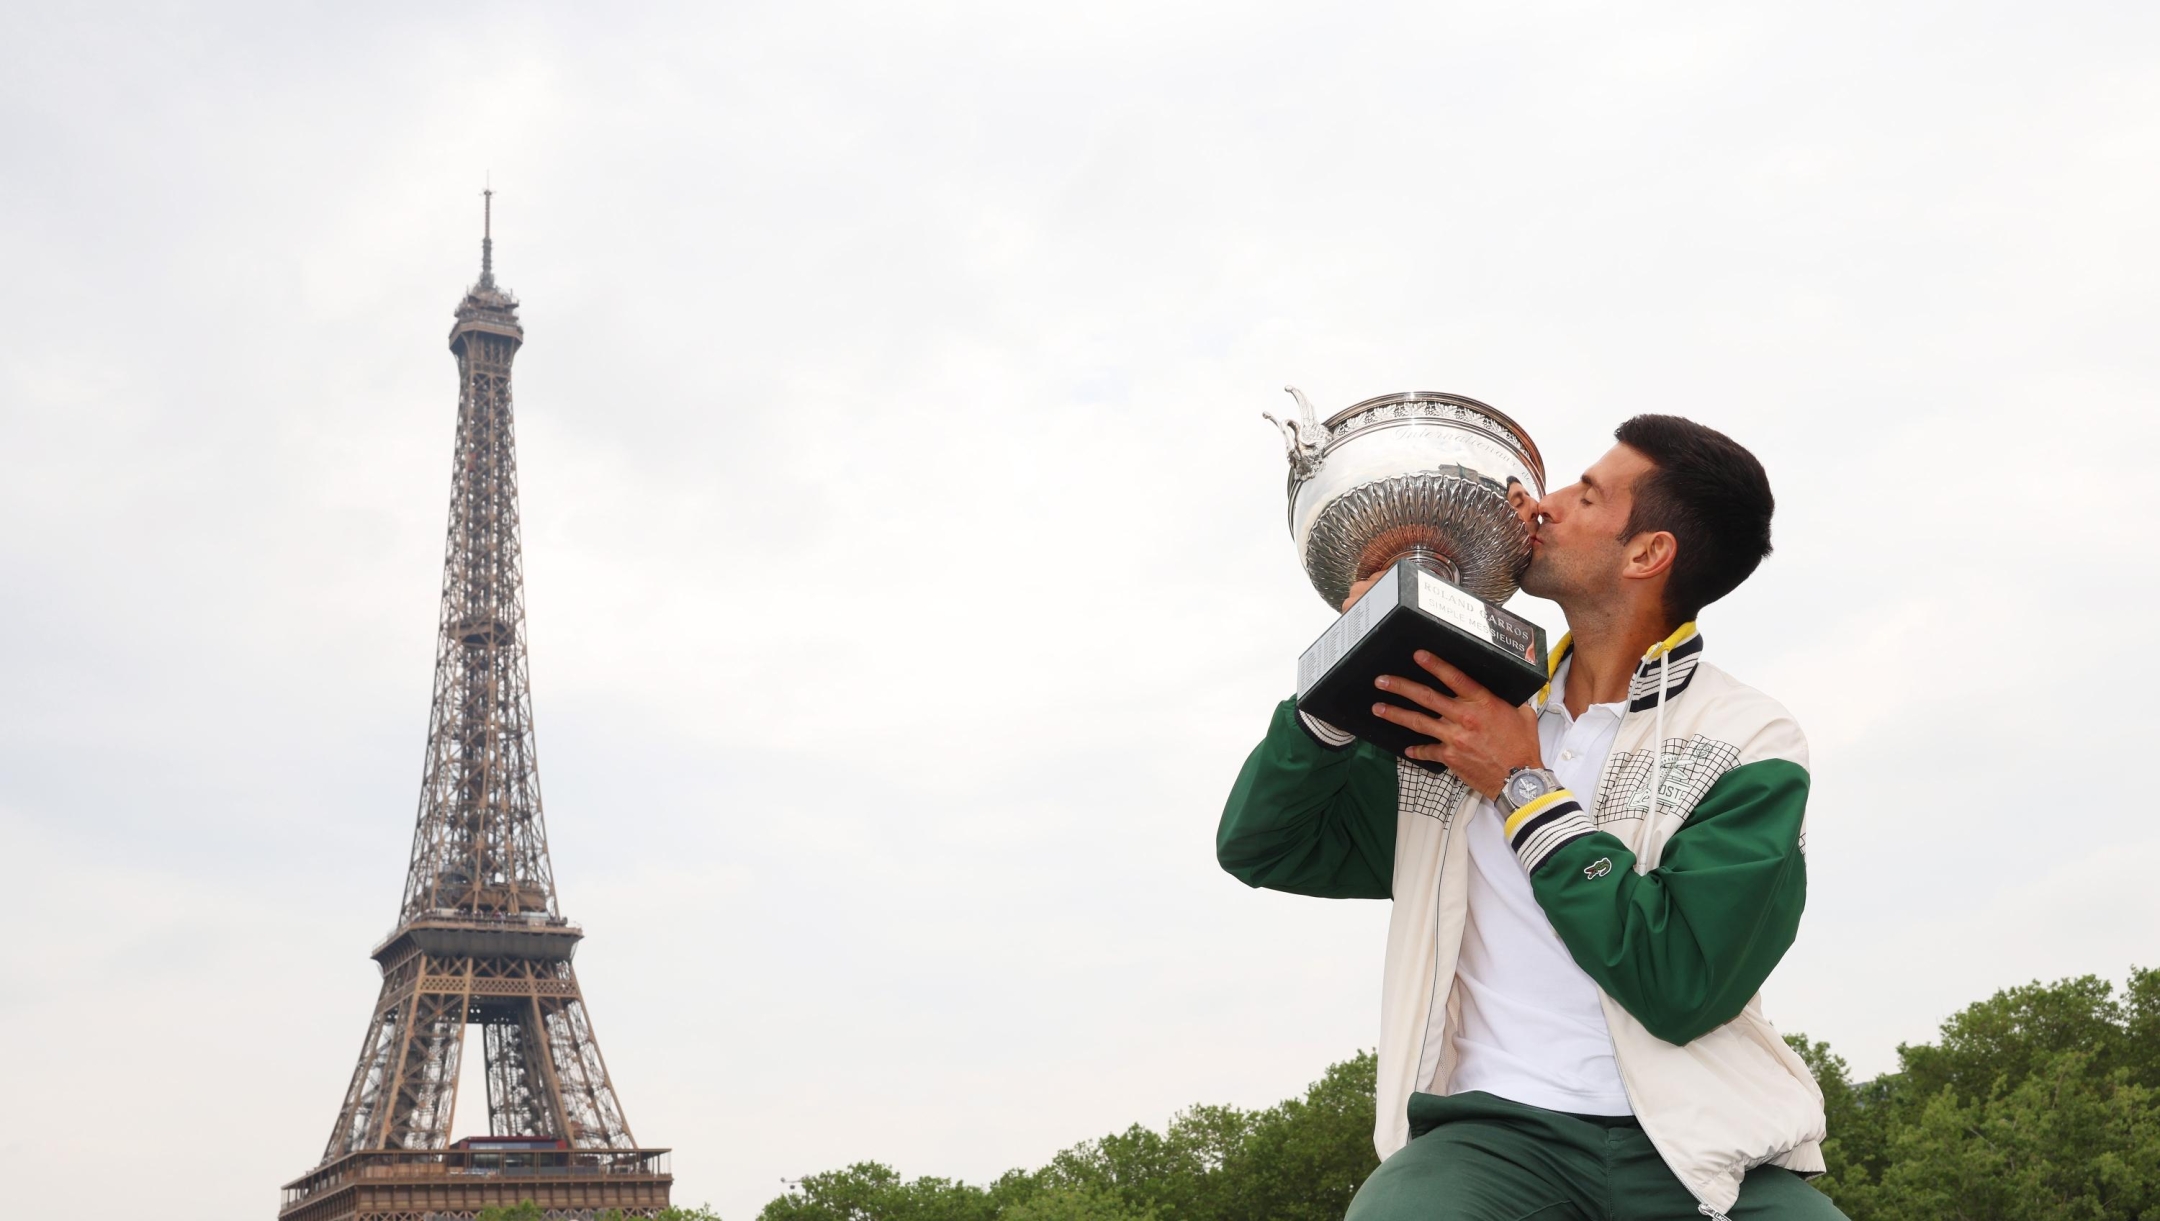 PARIS, FRANCE - JUNE 12: Novak Djokovic of Serbia kisses The Musketeers? Cup after winning his 23rd grand slam trophy on the Bir-Hakeim bridge after winning the Men's Singles Title in the 2023 French Open on June 12, 2023 in Paris, France. (Photo by Clive Brunskill/Getty Images) *** BESTPIX ***